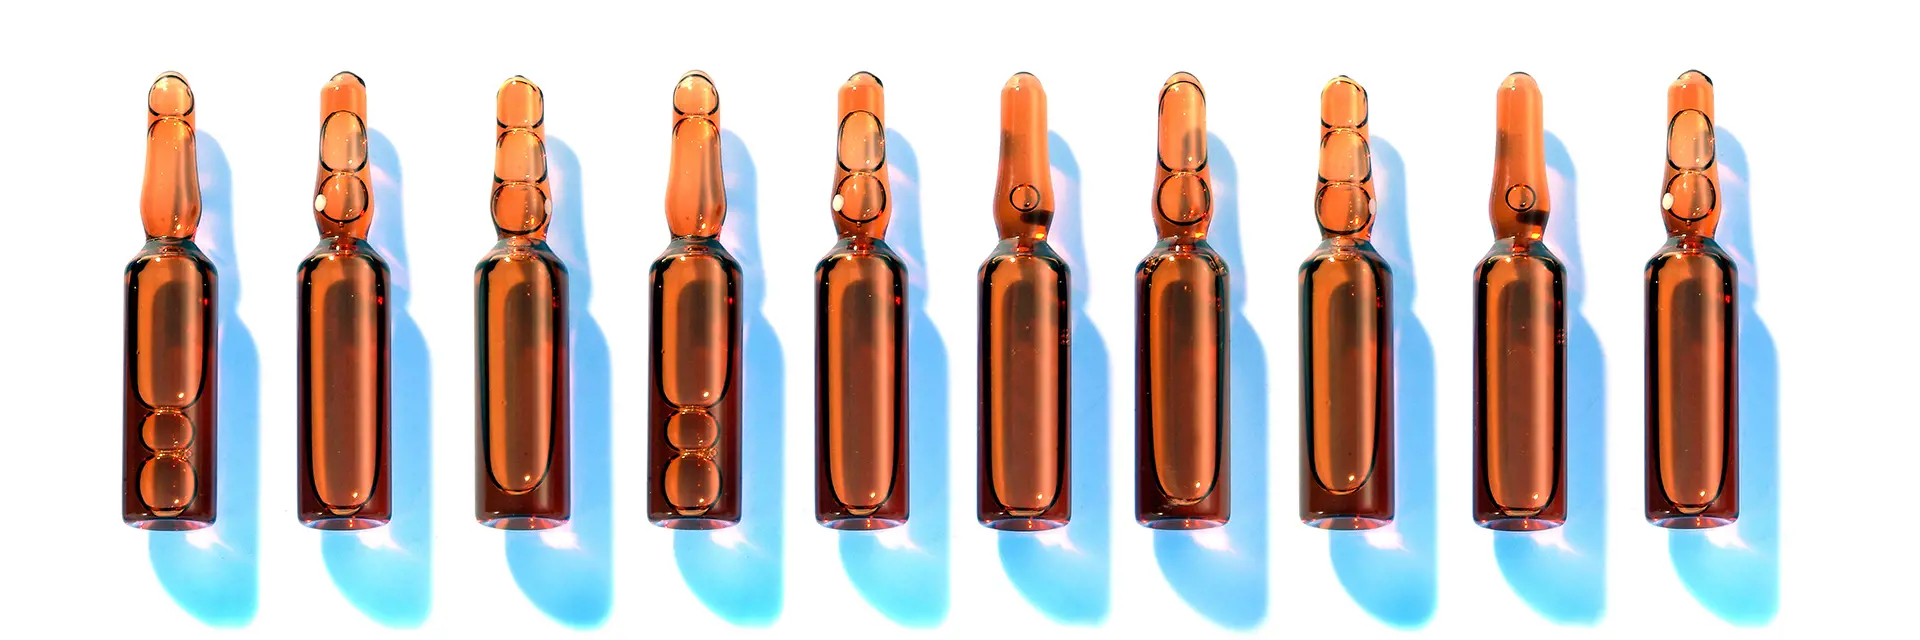 Brown ampoules with blue shadows on a white background